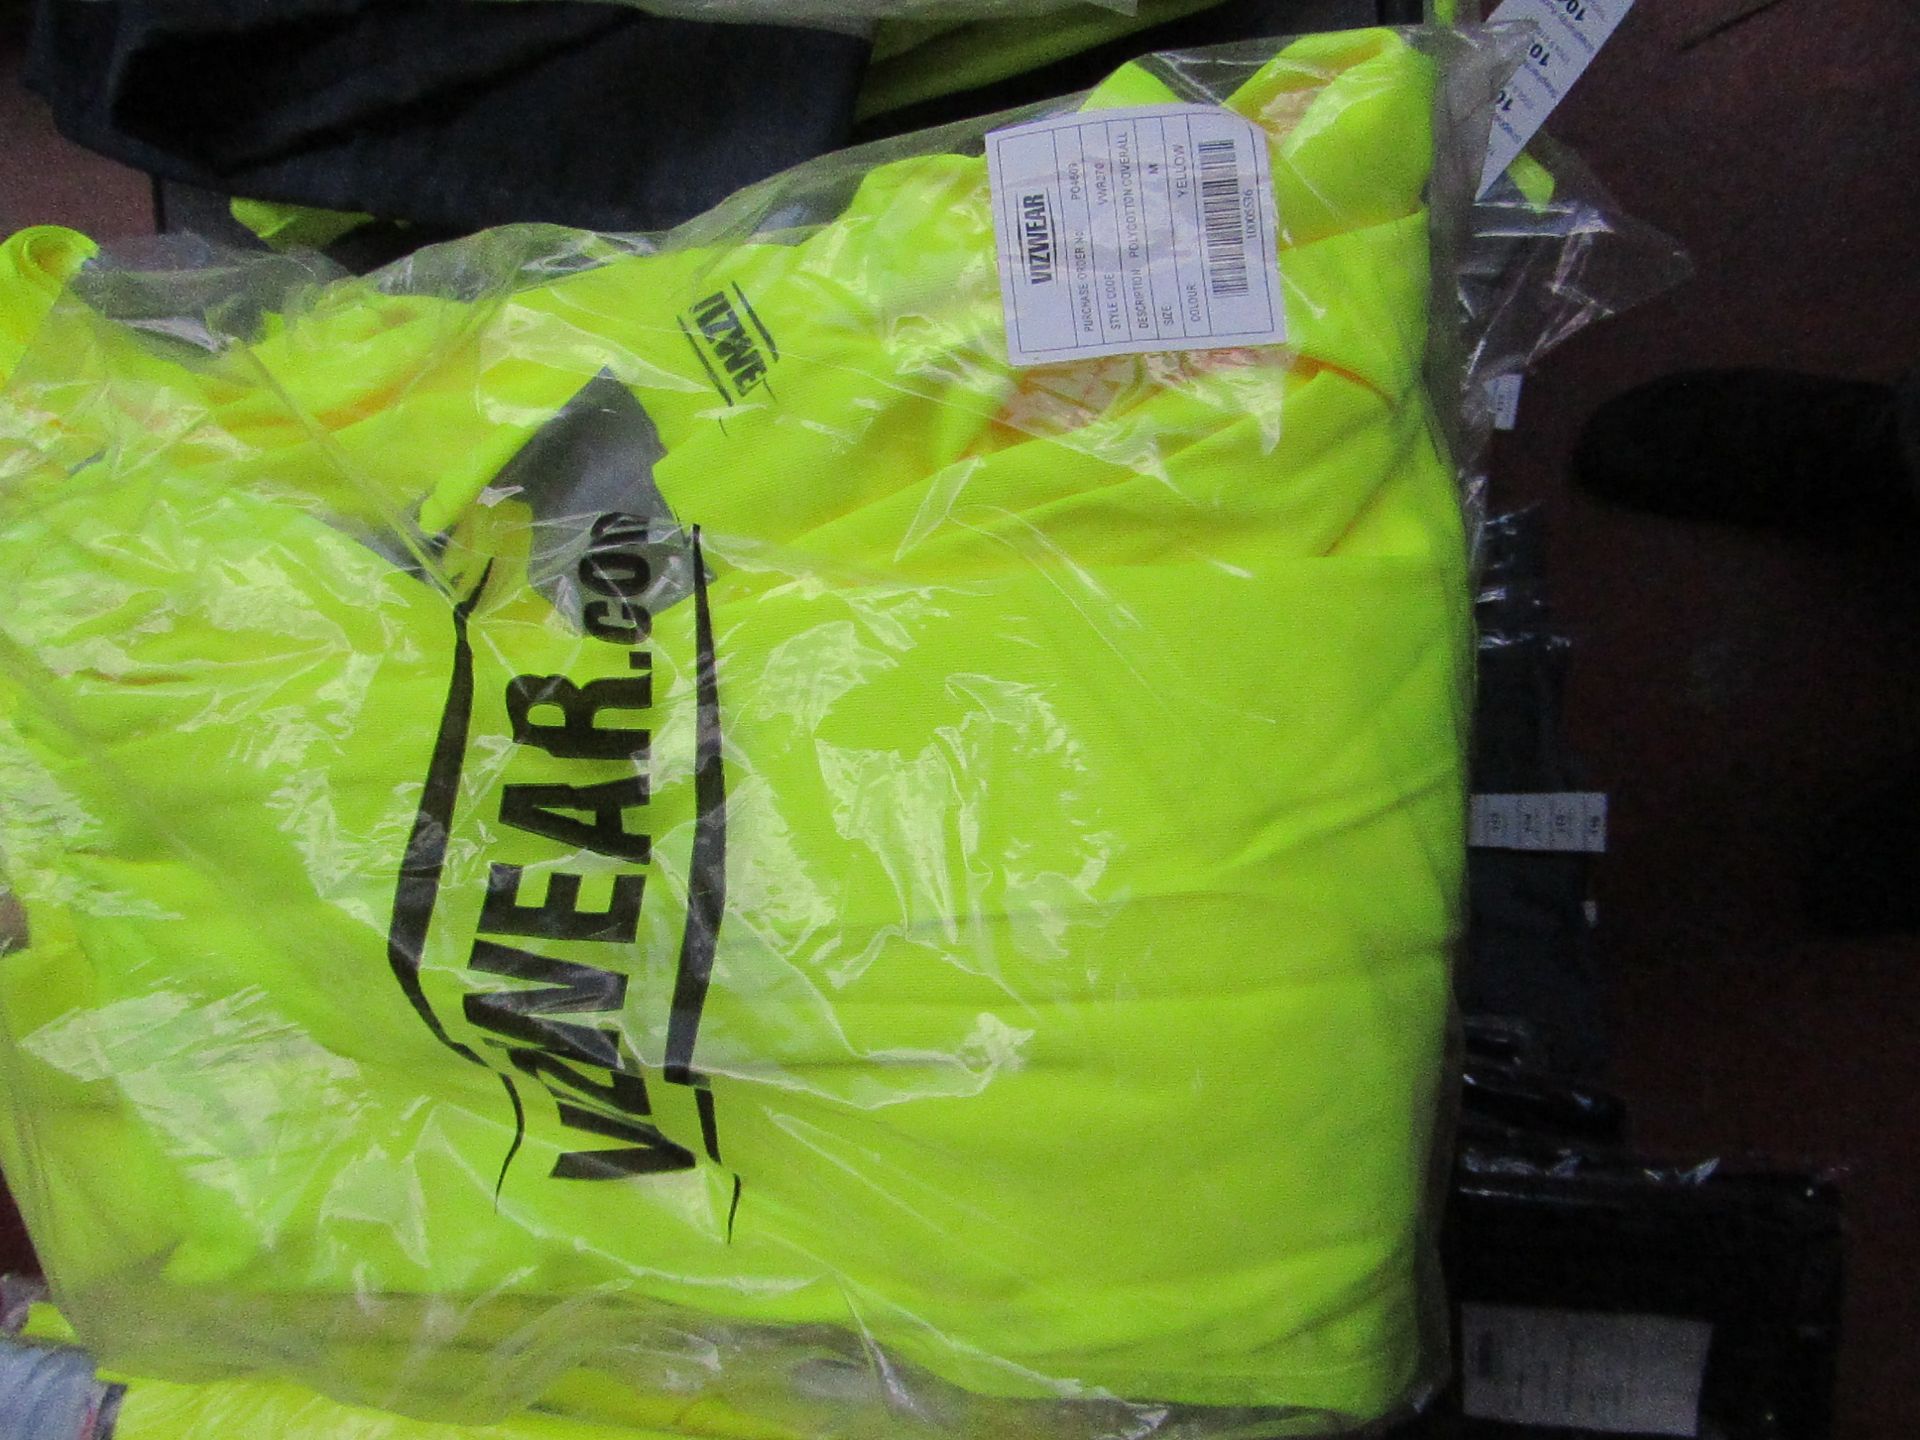 Vizwear - Polycotton Hi-Vis Yellow Coverall - Size Medium - New & Packaged.